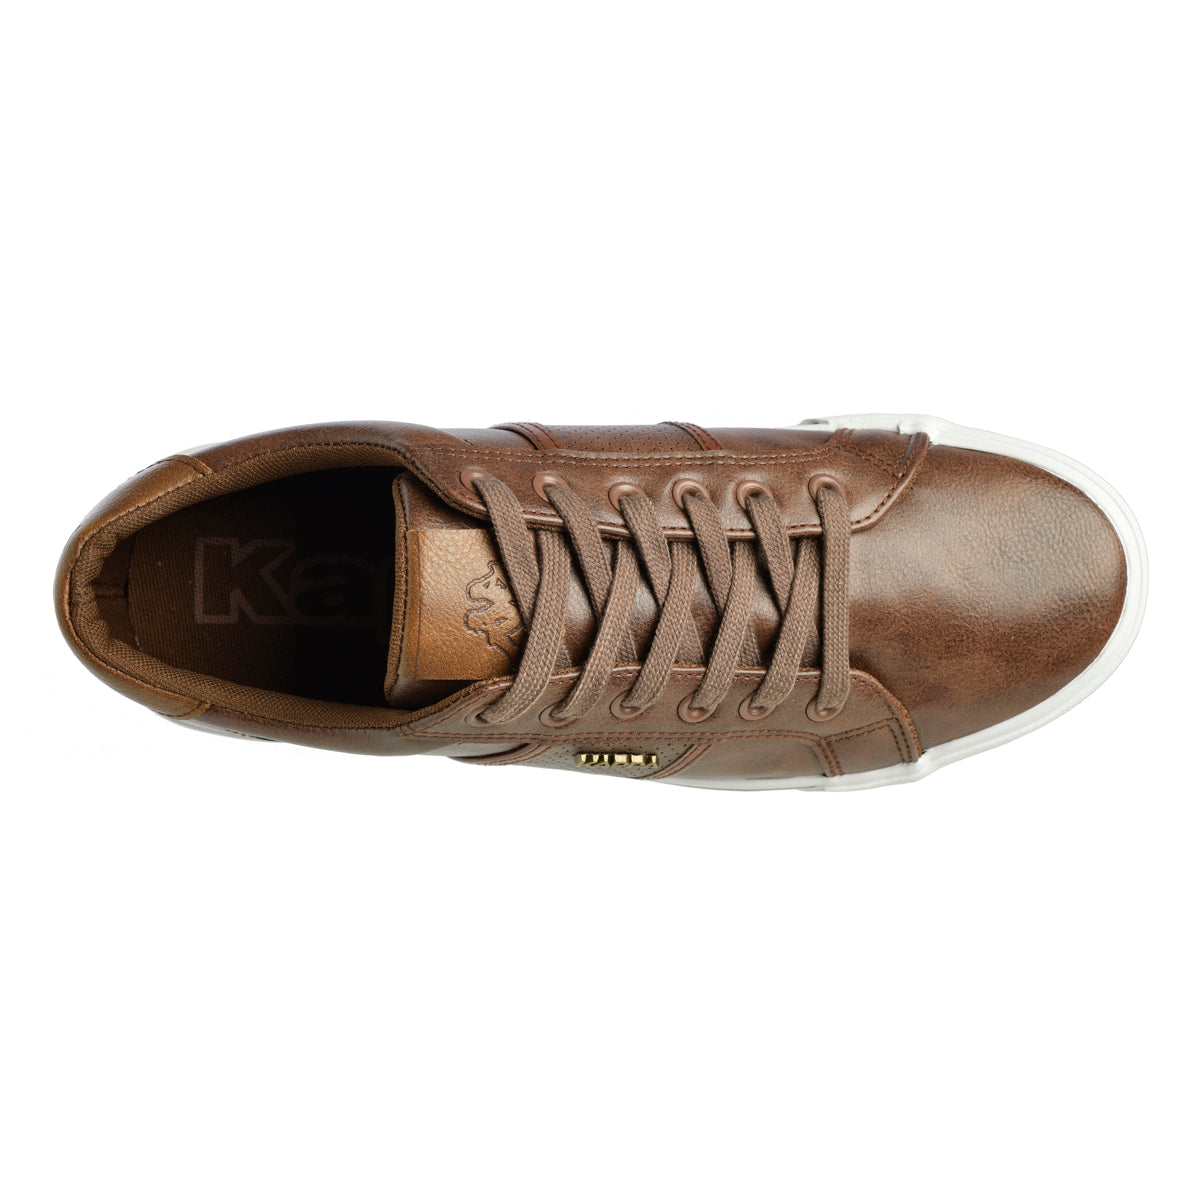 Chaussures lifestyle Chiva Marron homme - image 4